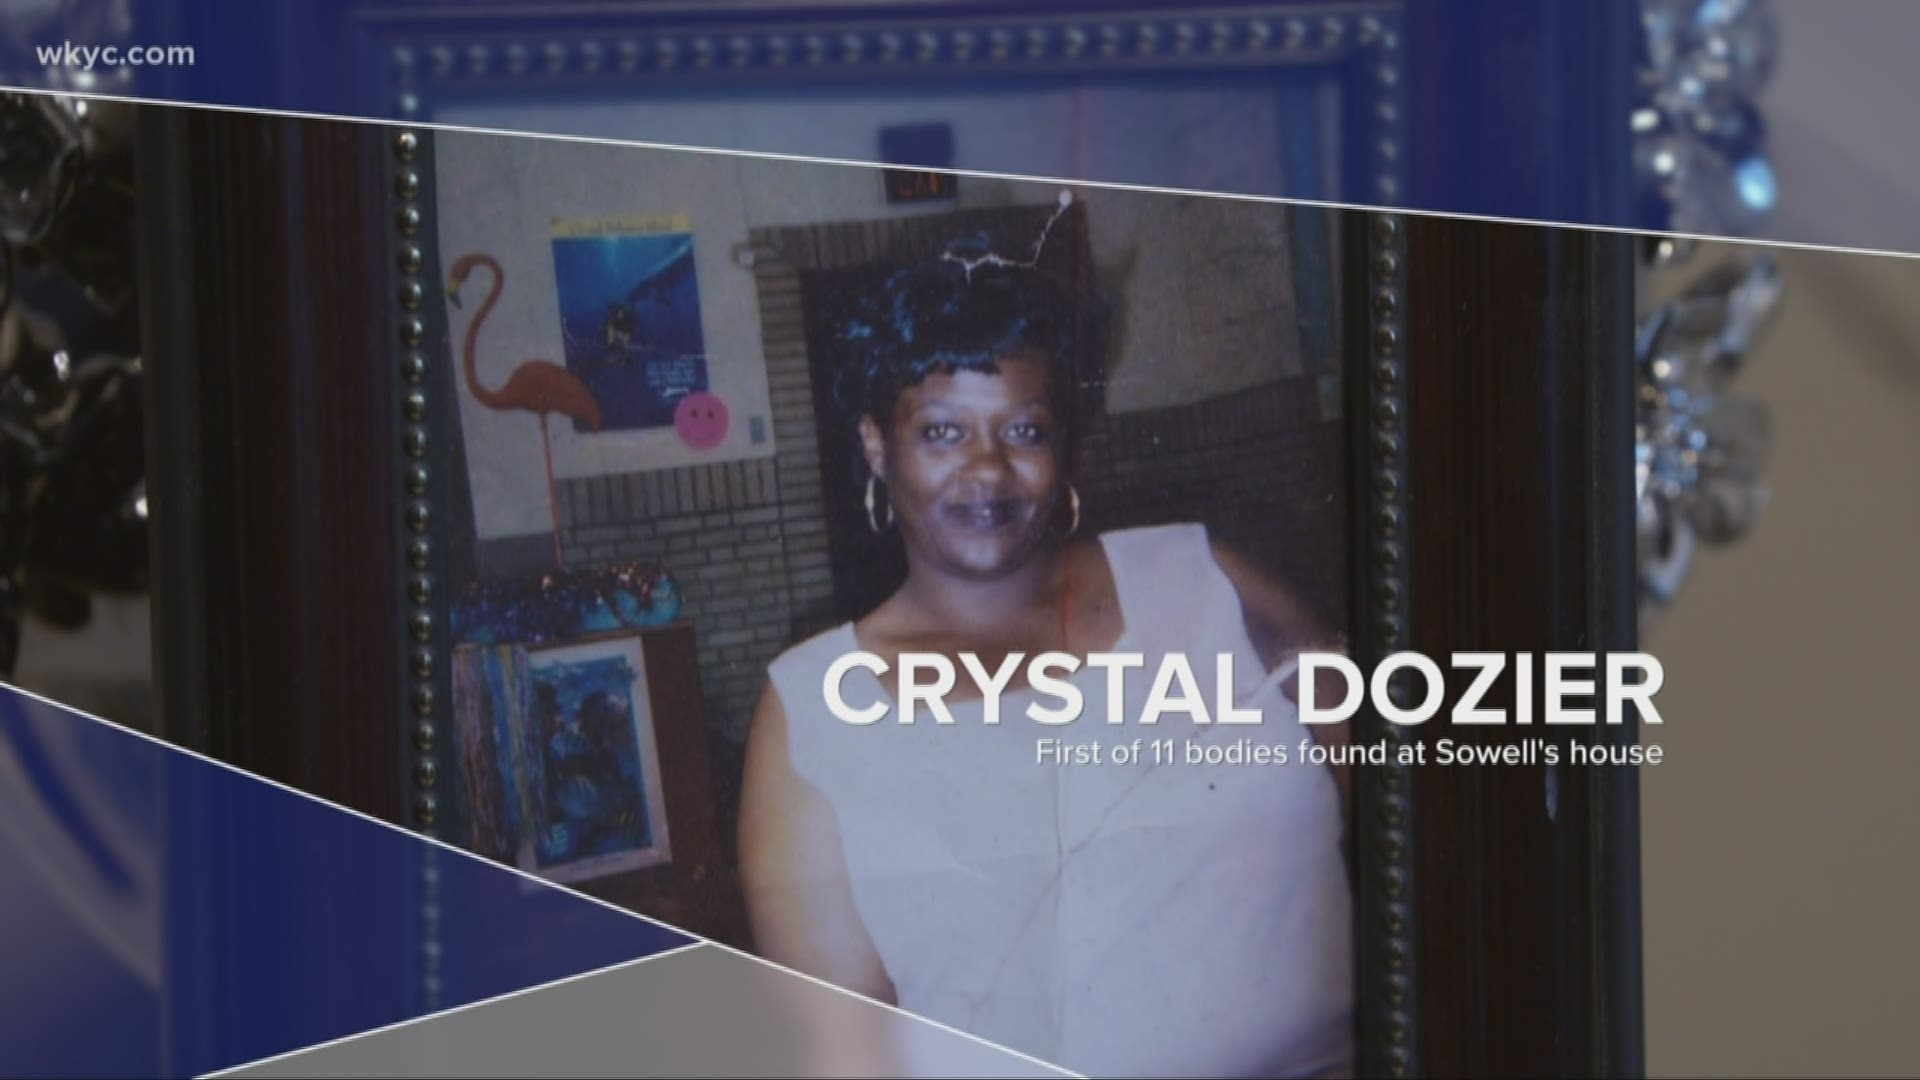 Ten years later, Anthony Dozier is at peace, even naming his computer company Crystal Clear Solutions in memory of his mother Crystal. Leon Bibb reports.